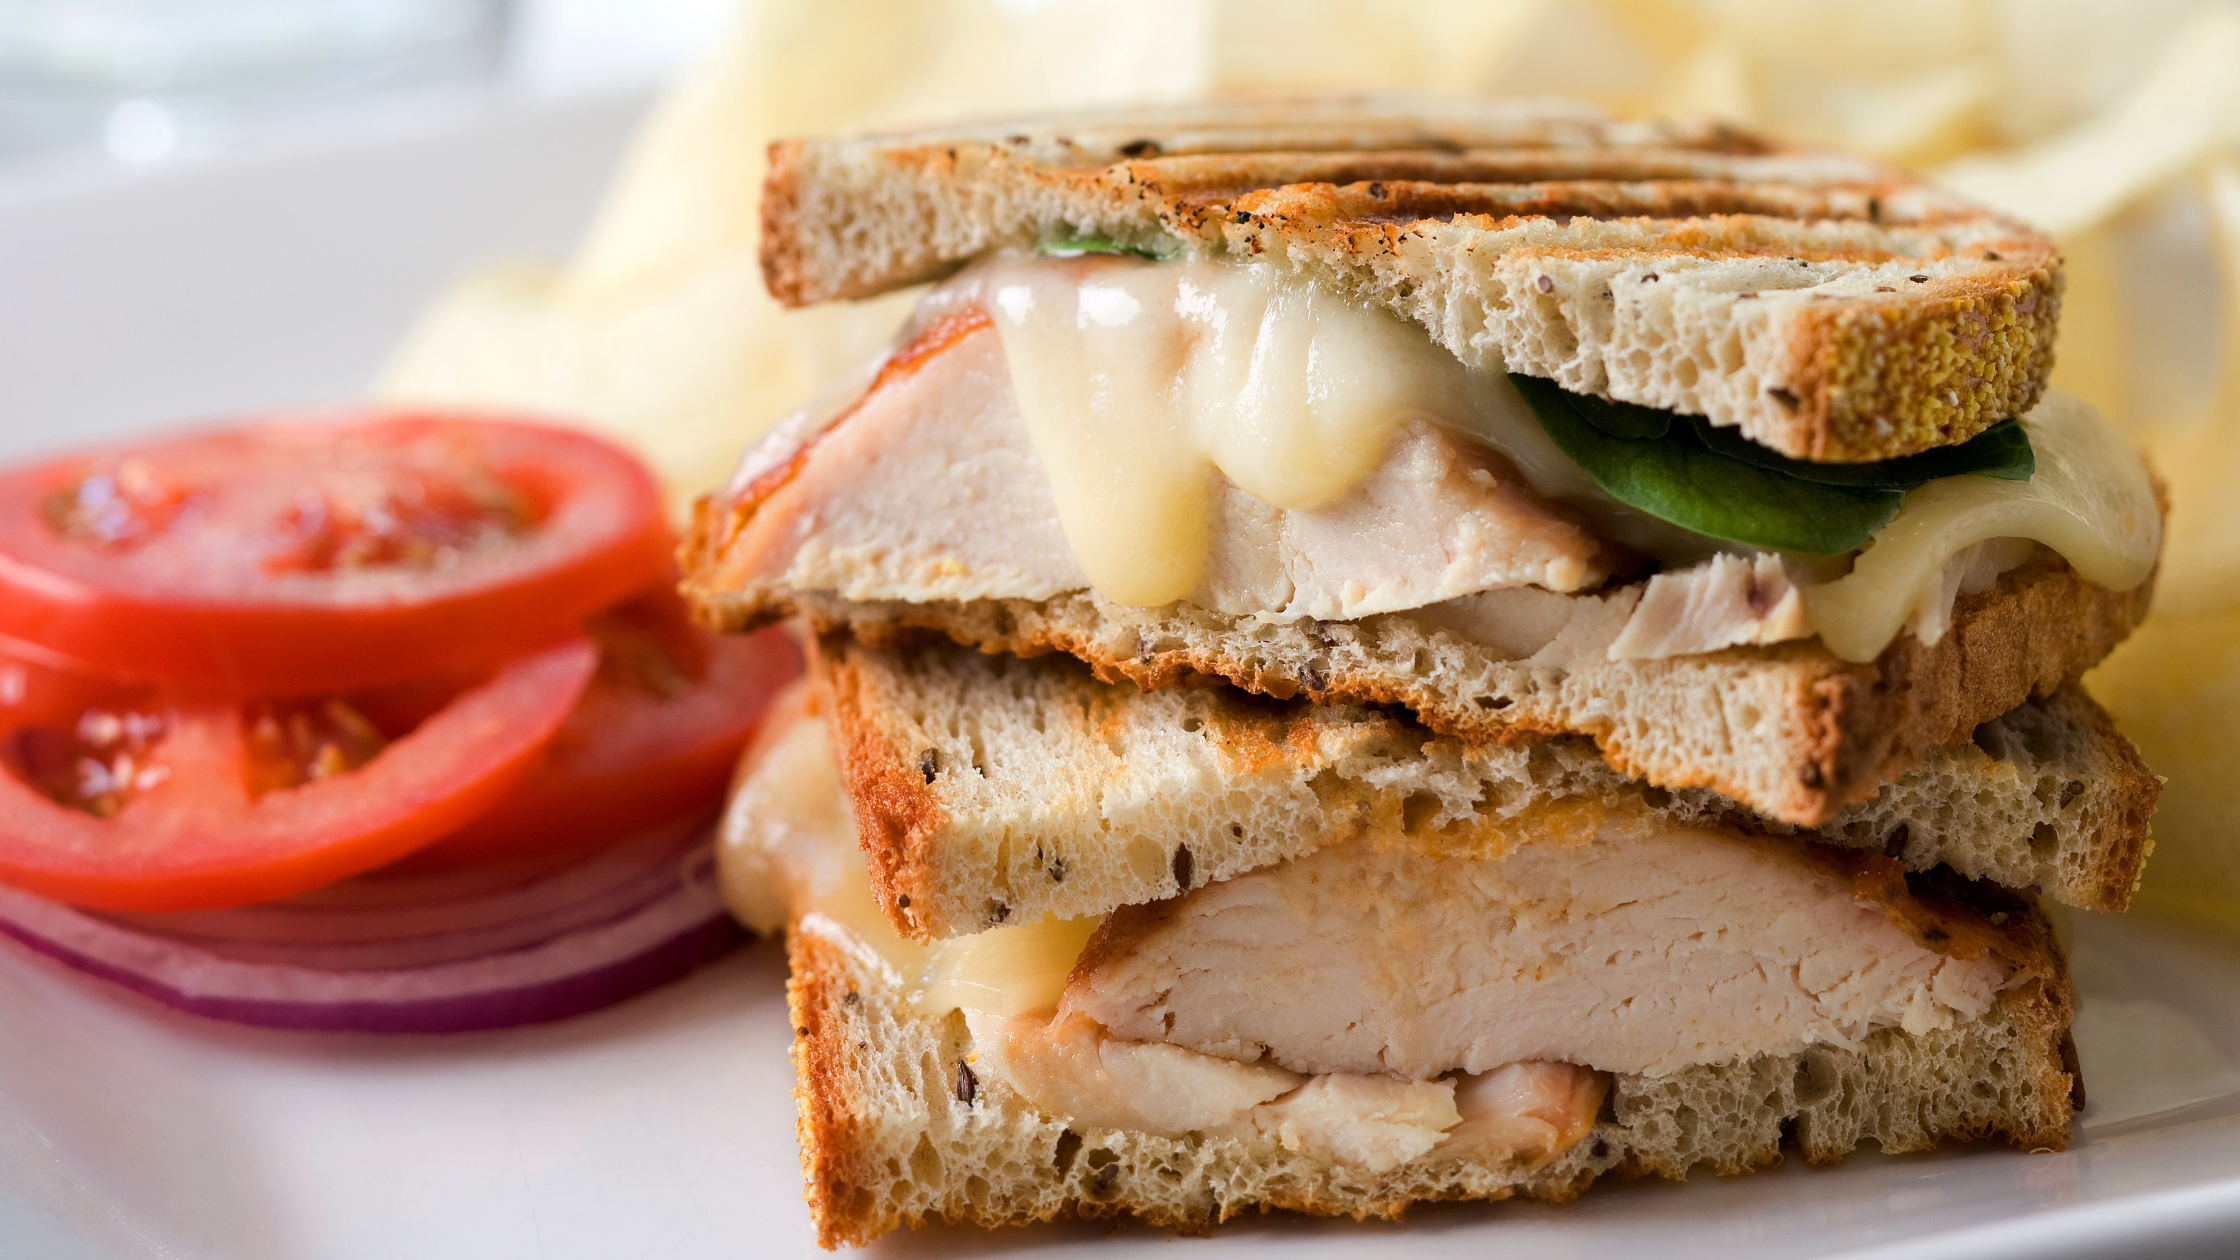 Flavorful Grilled Chicken & Brie Panini 67